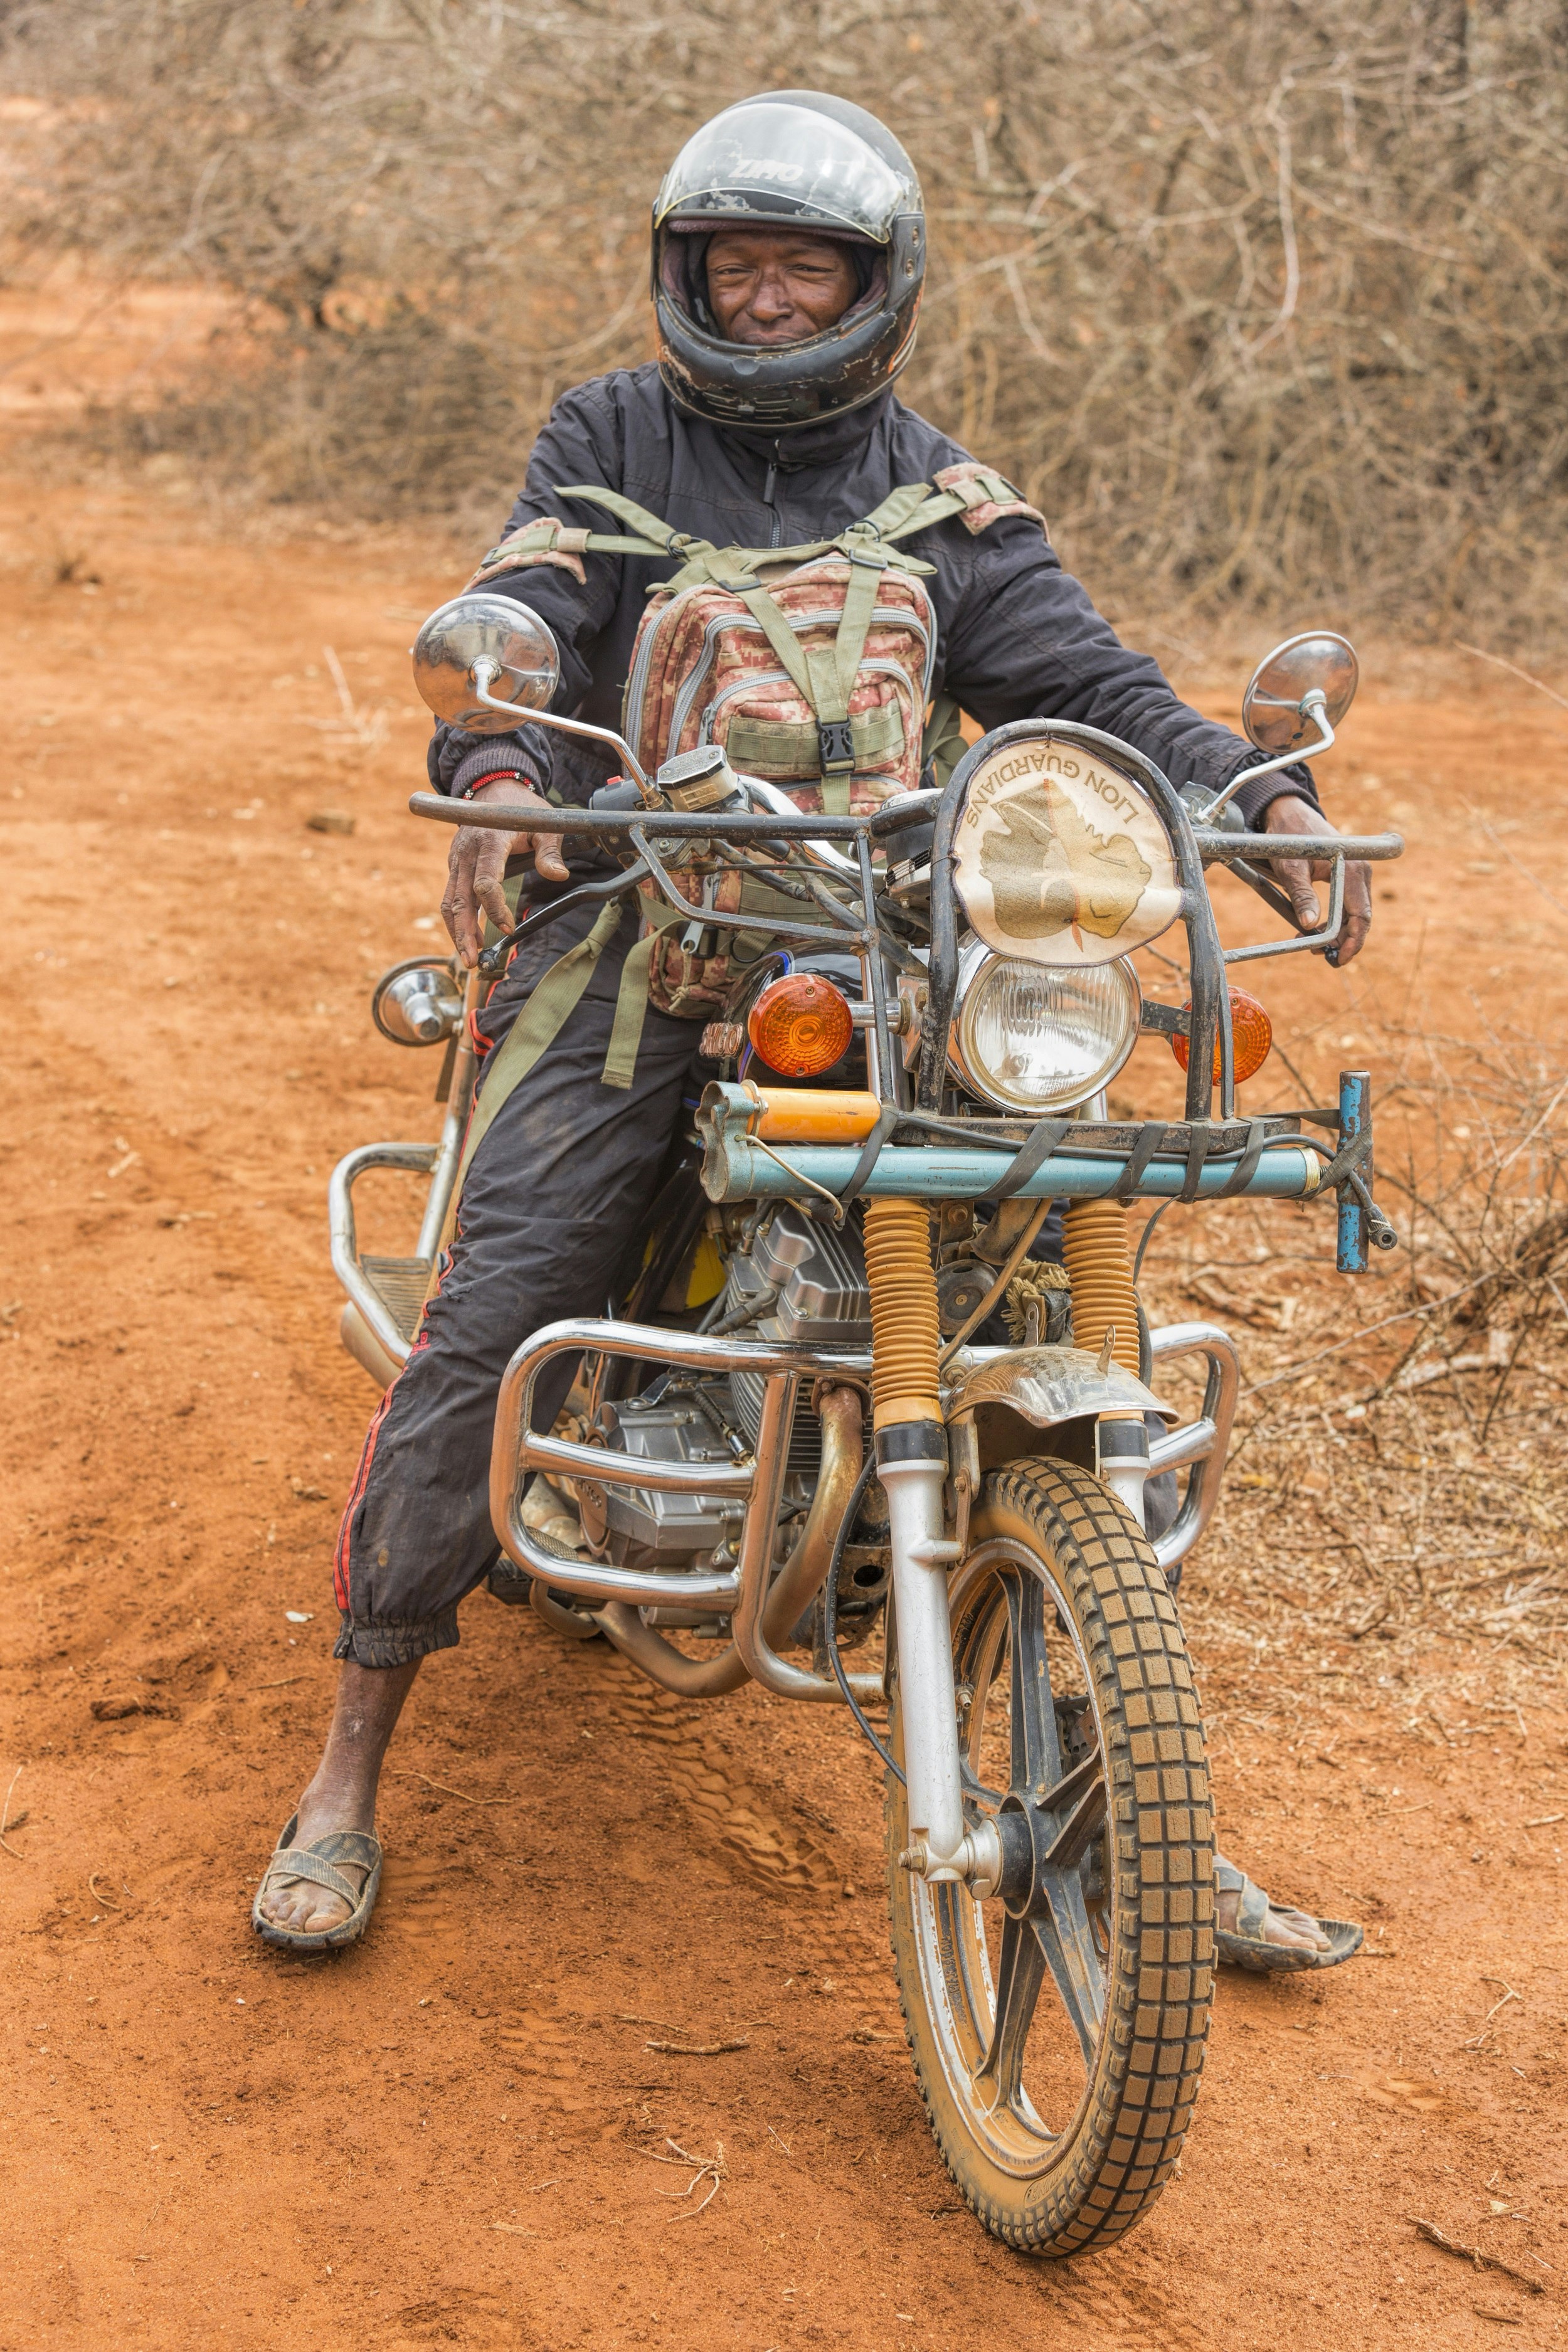 A Maasai warrior, clad in a black set of overalls, black helmet and sandals made of old tyres, sits astride a dirt-covered motorbike; he's wearing a backback on his chest, with the bike sitting stationary on a dirt road.